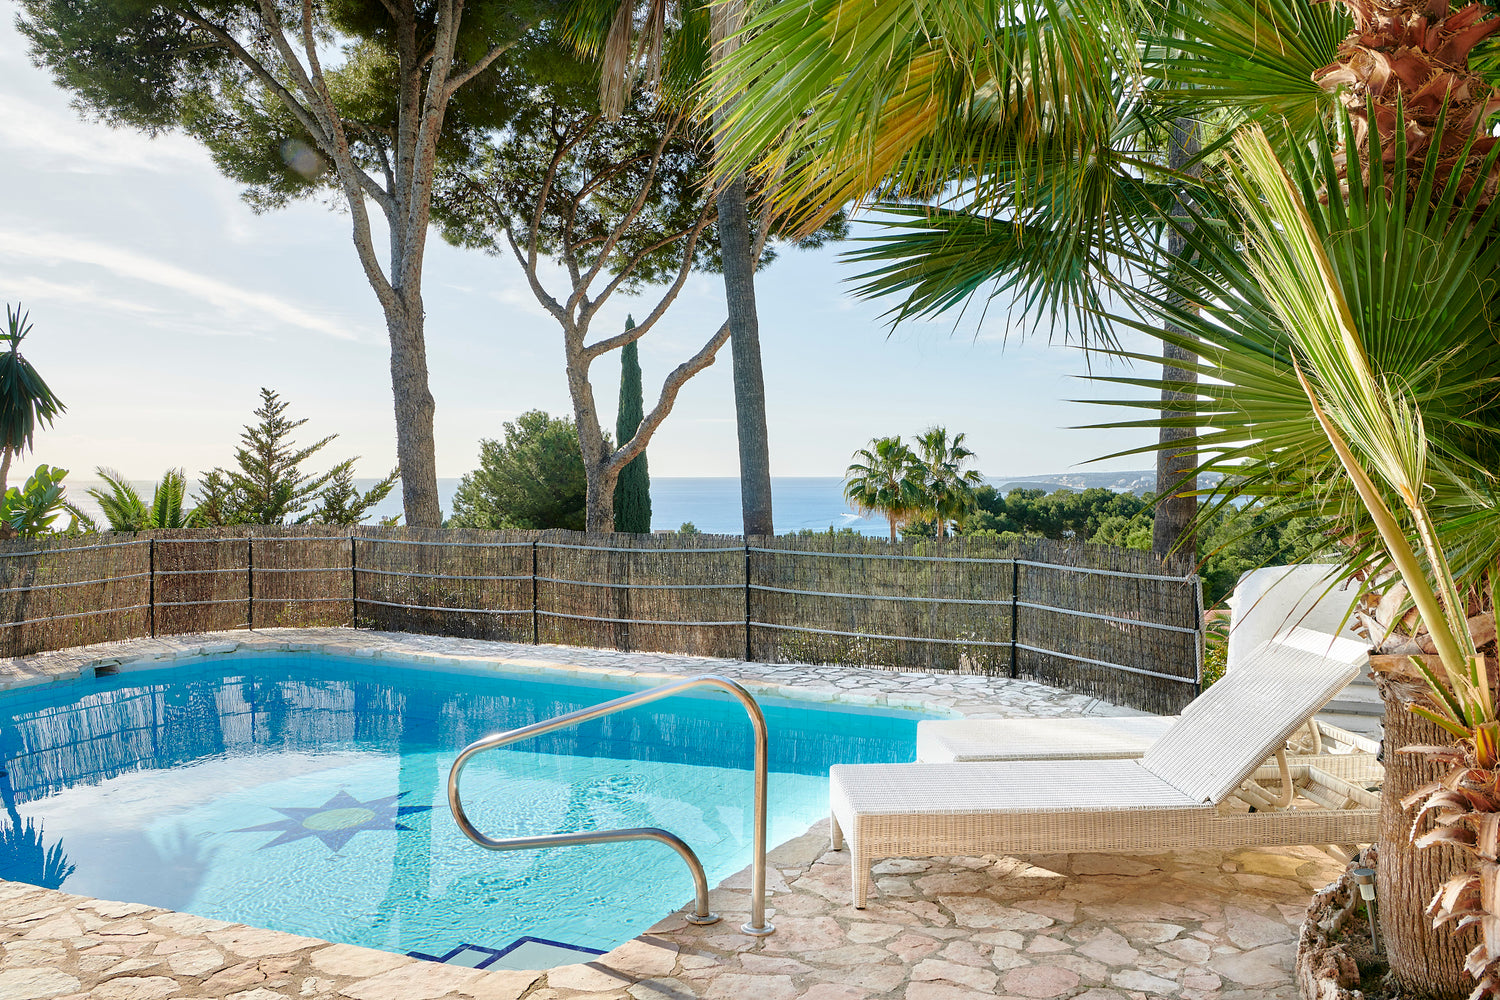 Spacious villa with character, overlooking the coast at Costa d’en Blanes